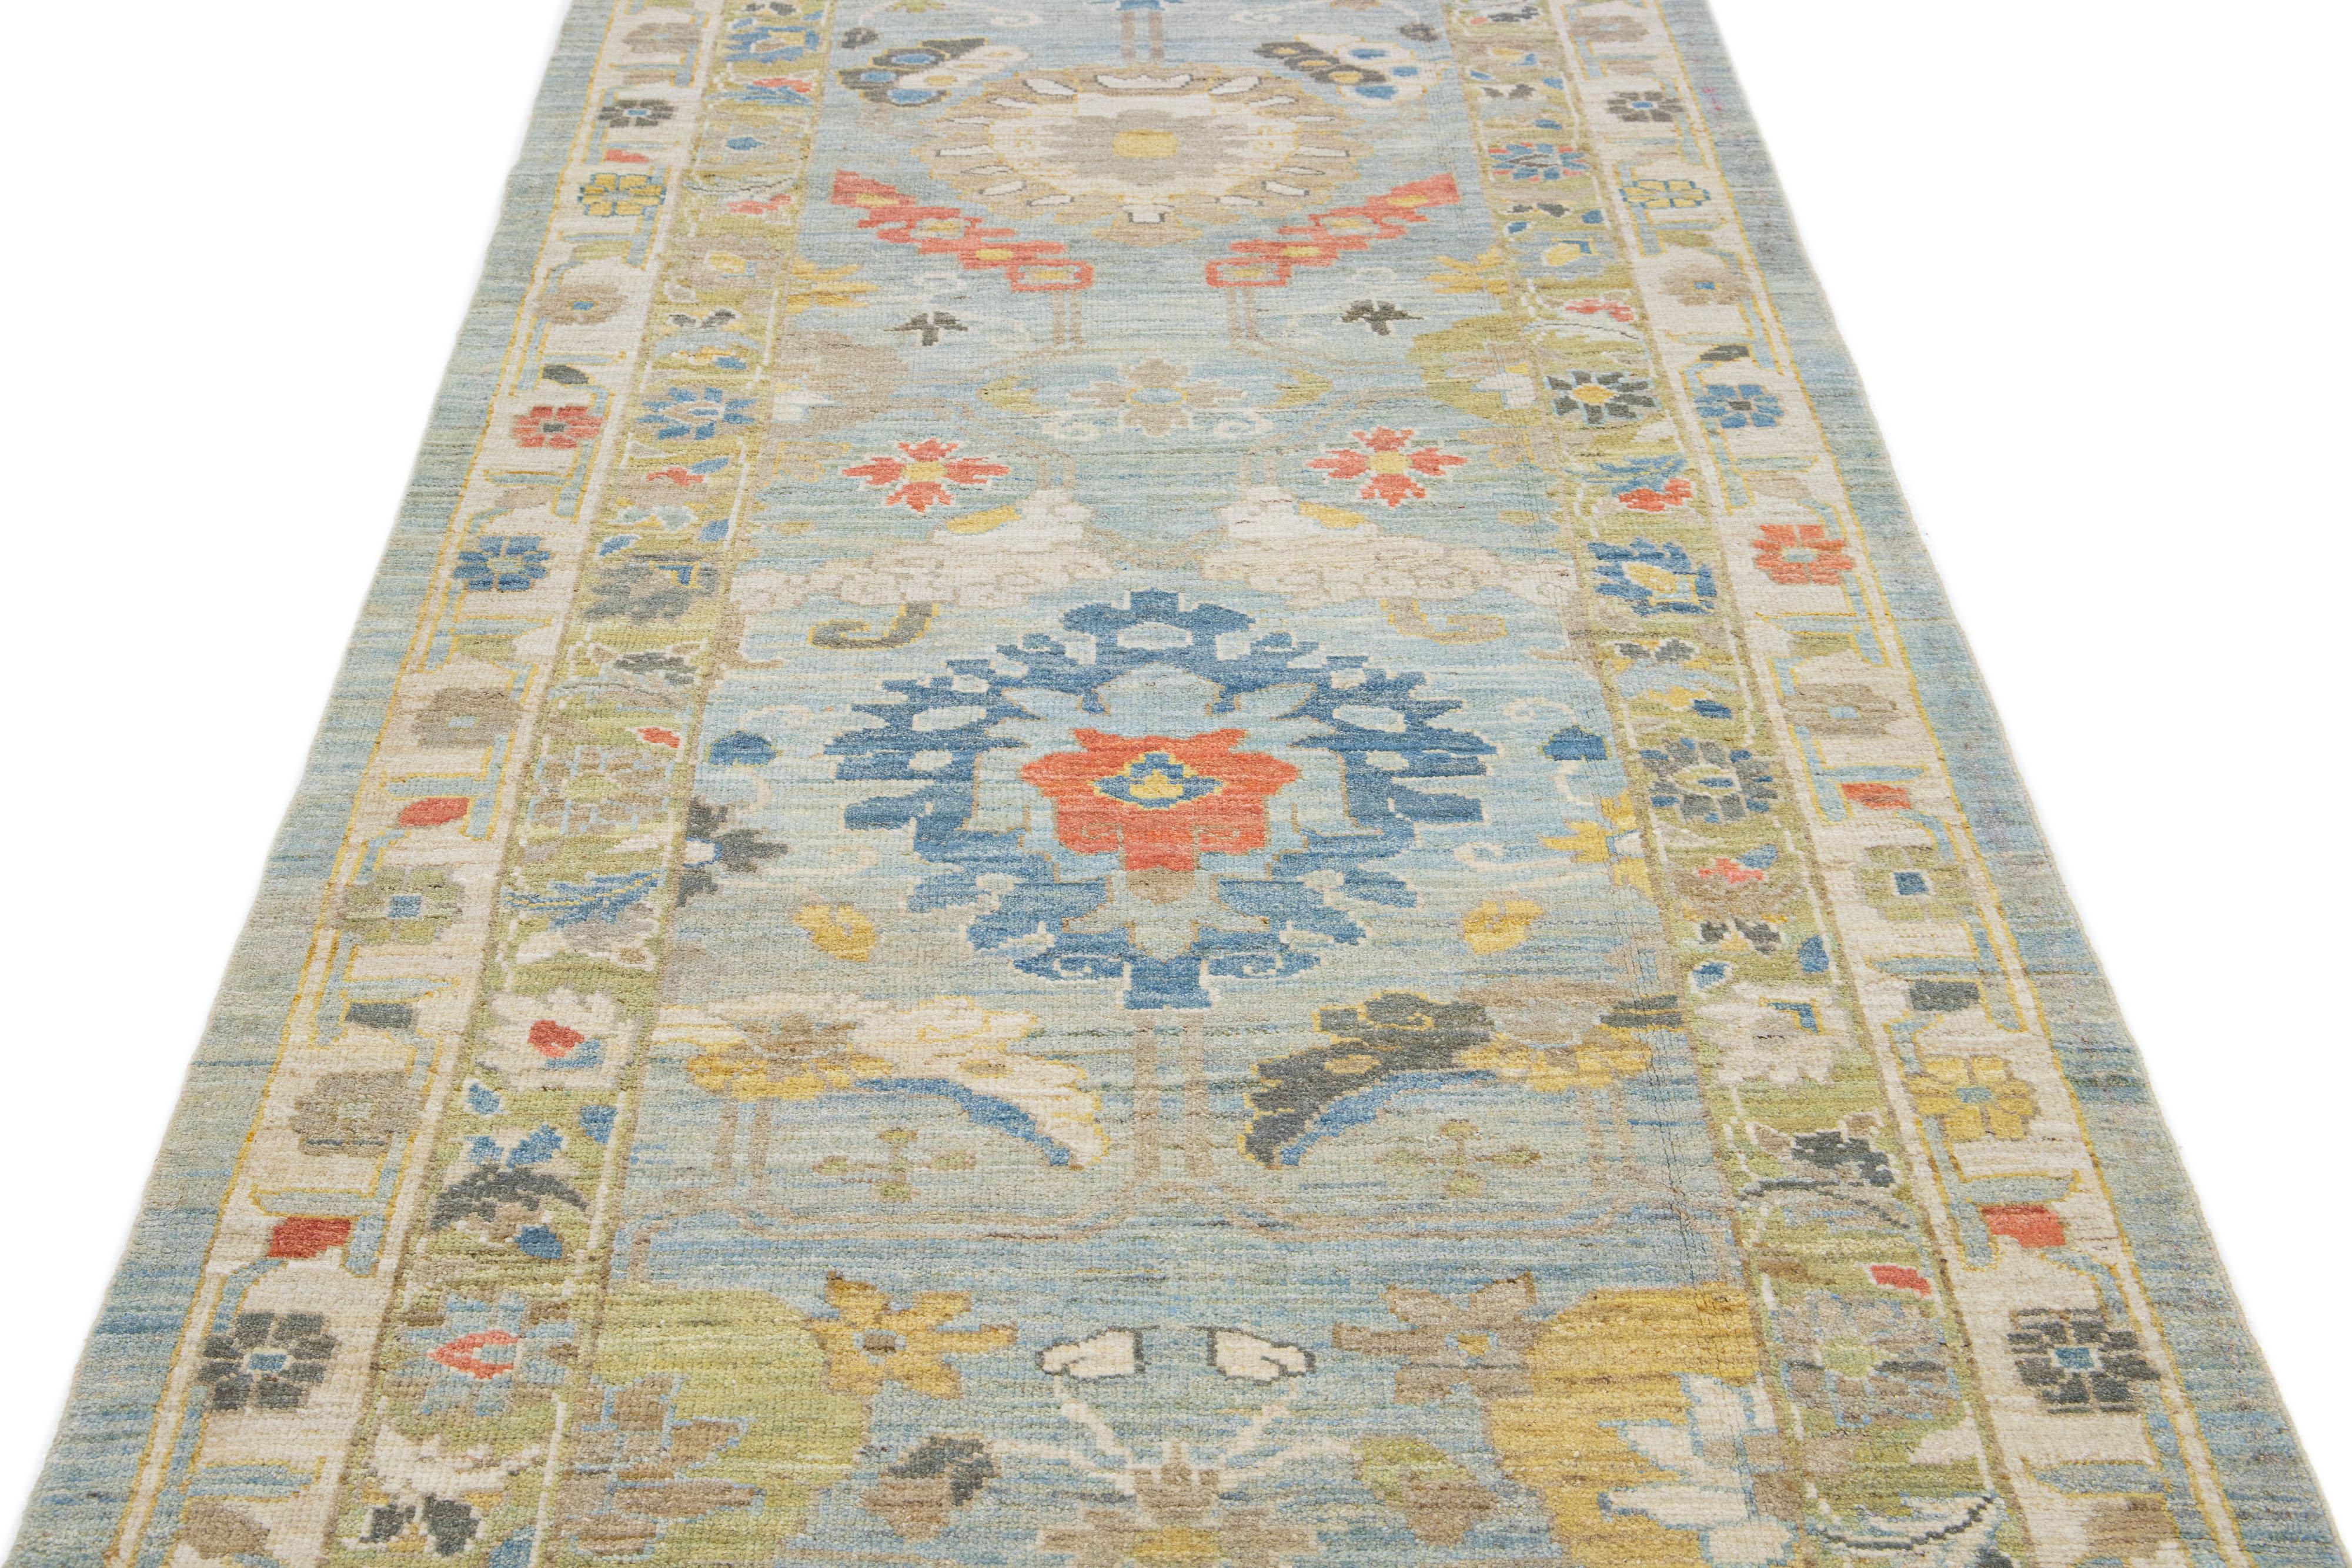 This contemporary take on the traditional Sultanabad style is showcased in an exquisite hand-knotted wool runner with a striking light blue color. An intricately designed frame accentuates its all-over floral motif, adorned with multicolored accents